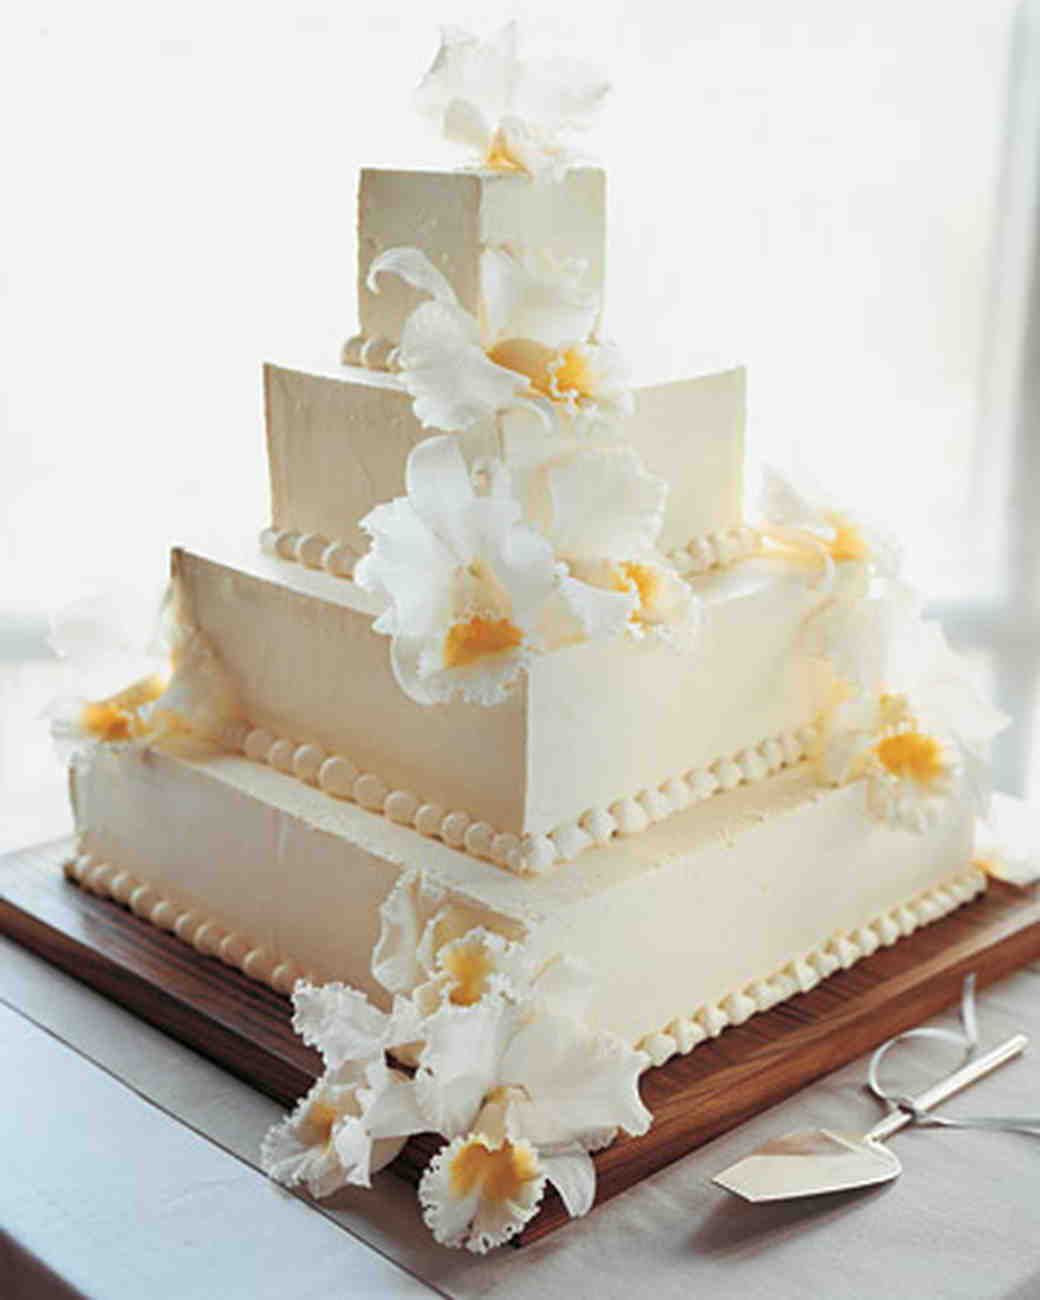 Square Wedding Cakes Pictures
 16 Unique and Eye catching Square Wedding Cake Ideas